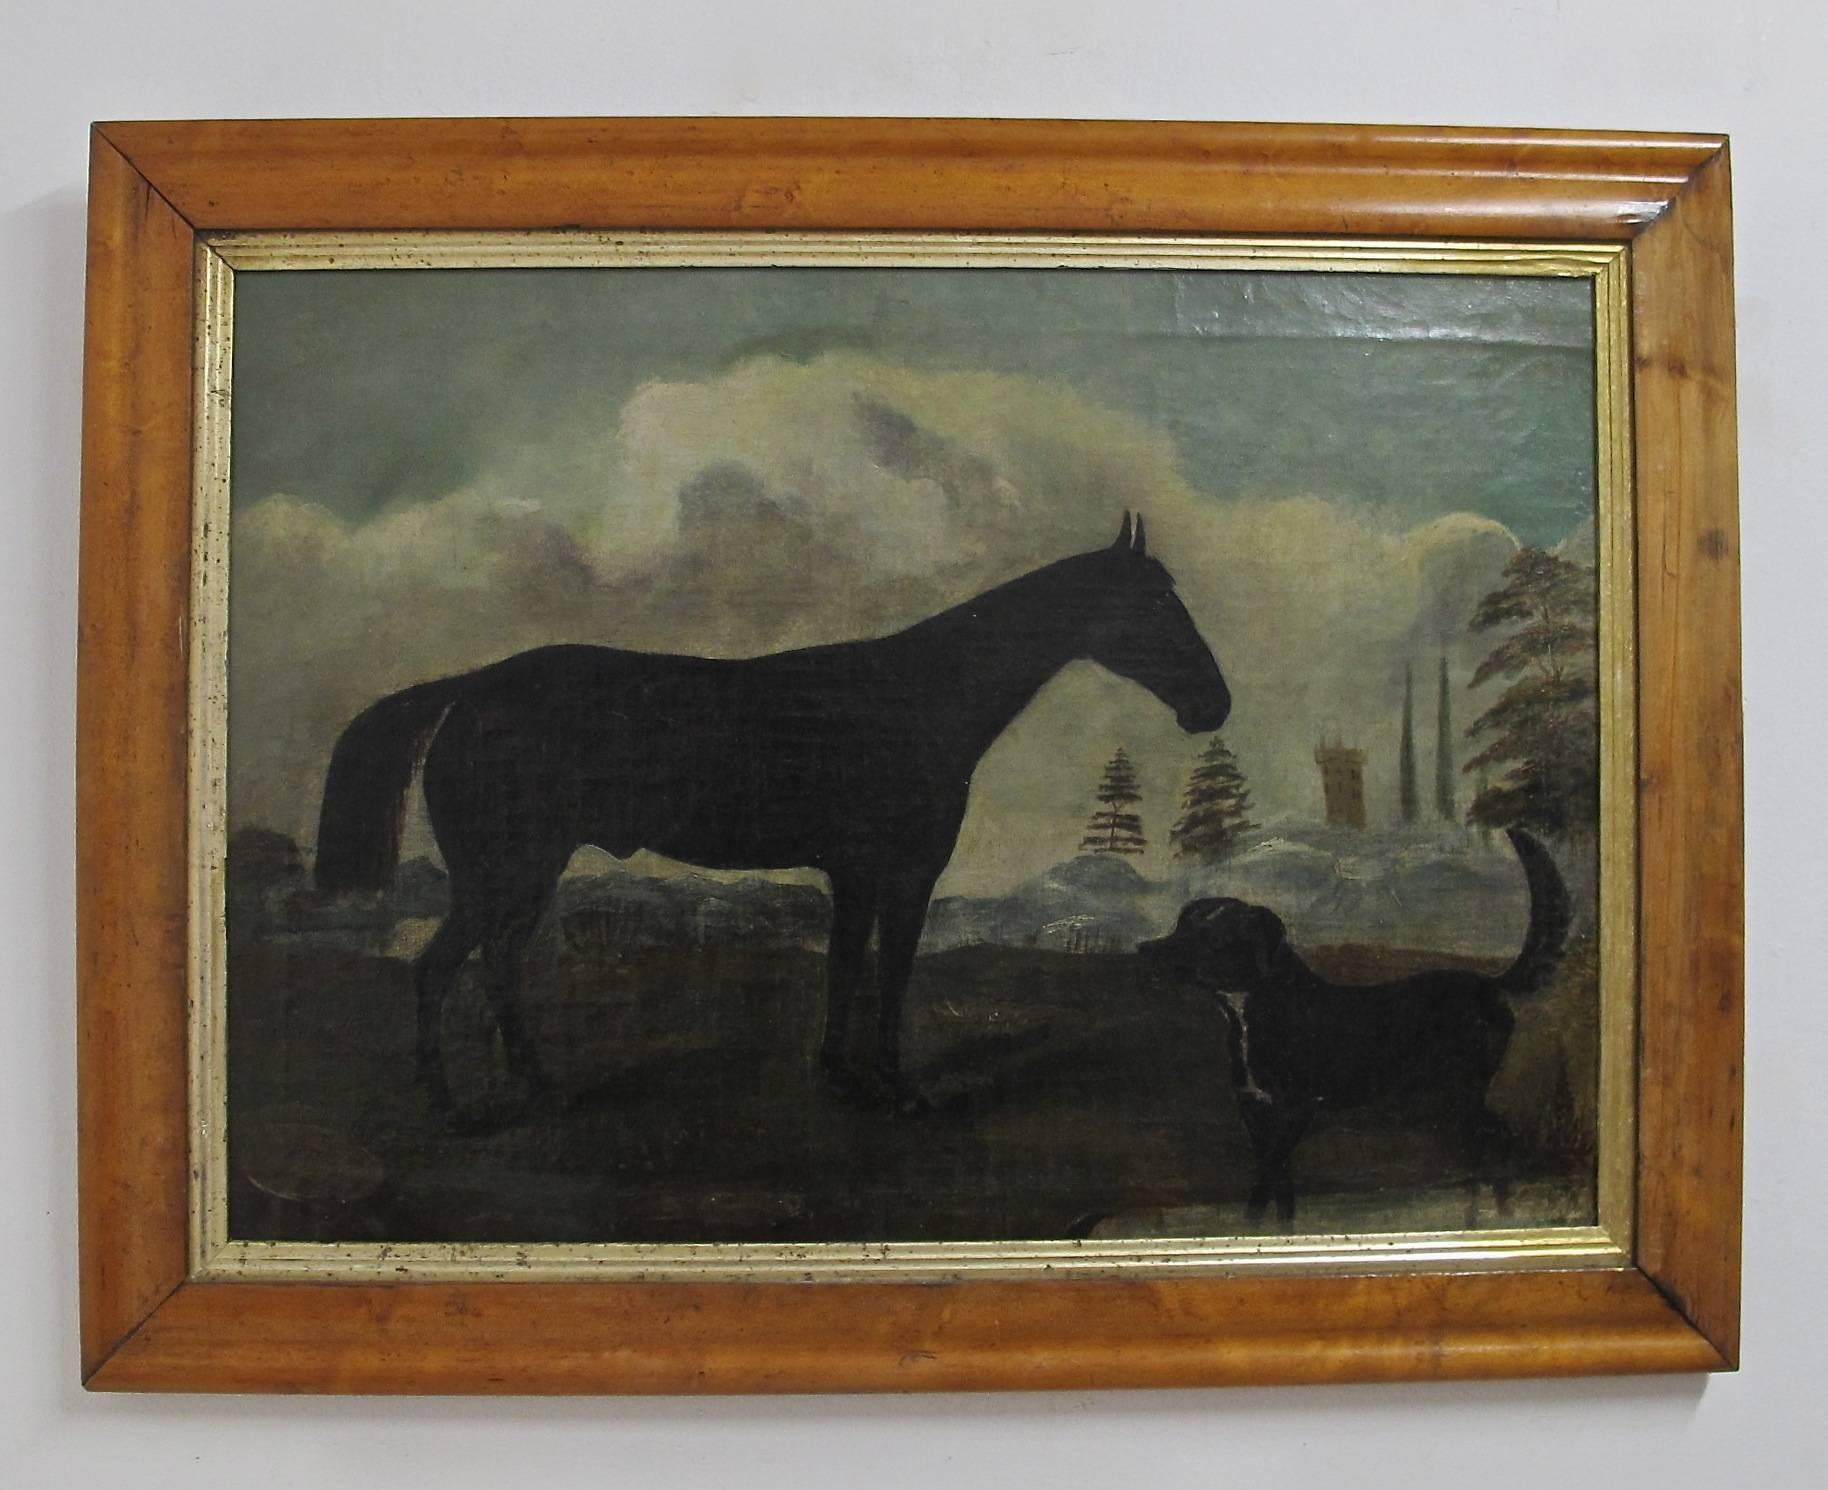 Charming old primitive painting of a horse and dog. Oil on canvas, original maple and gilt frame. England, early 19th century.